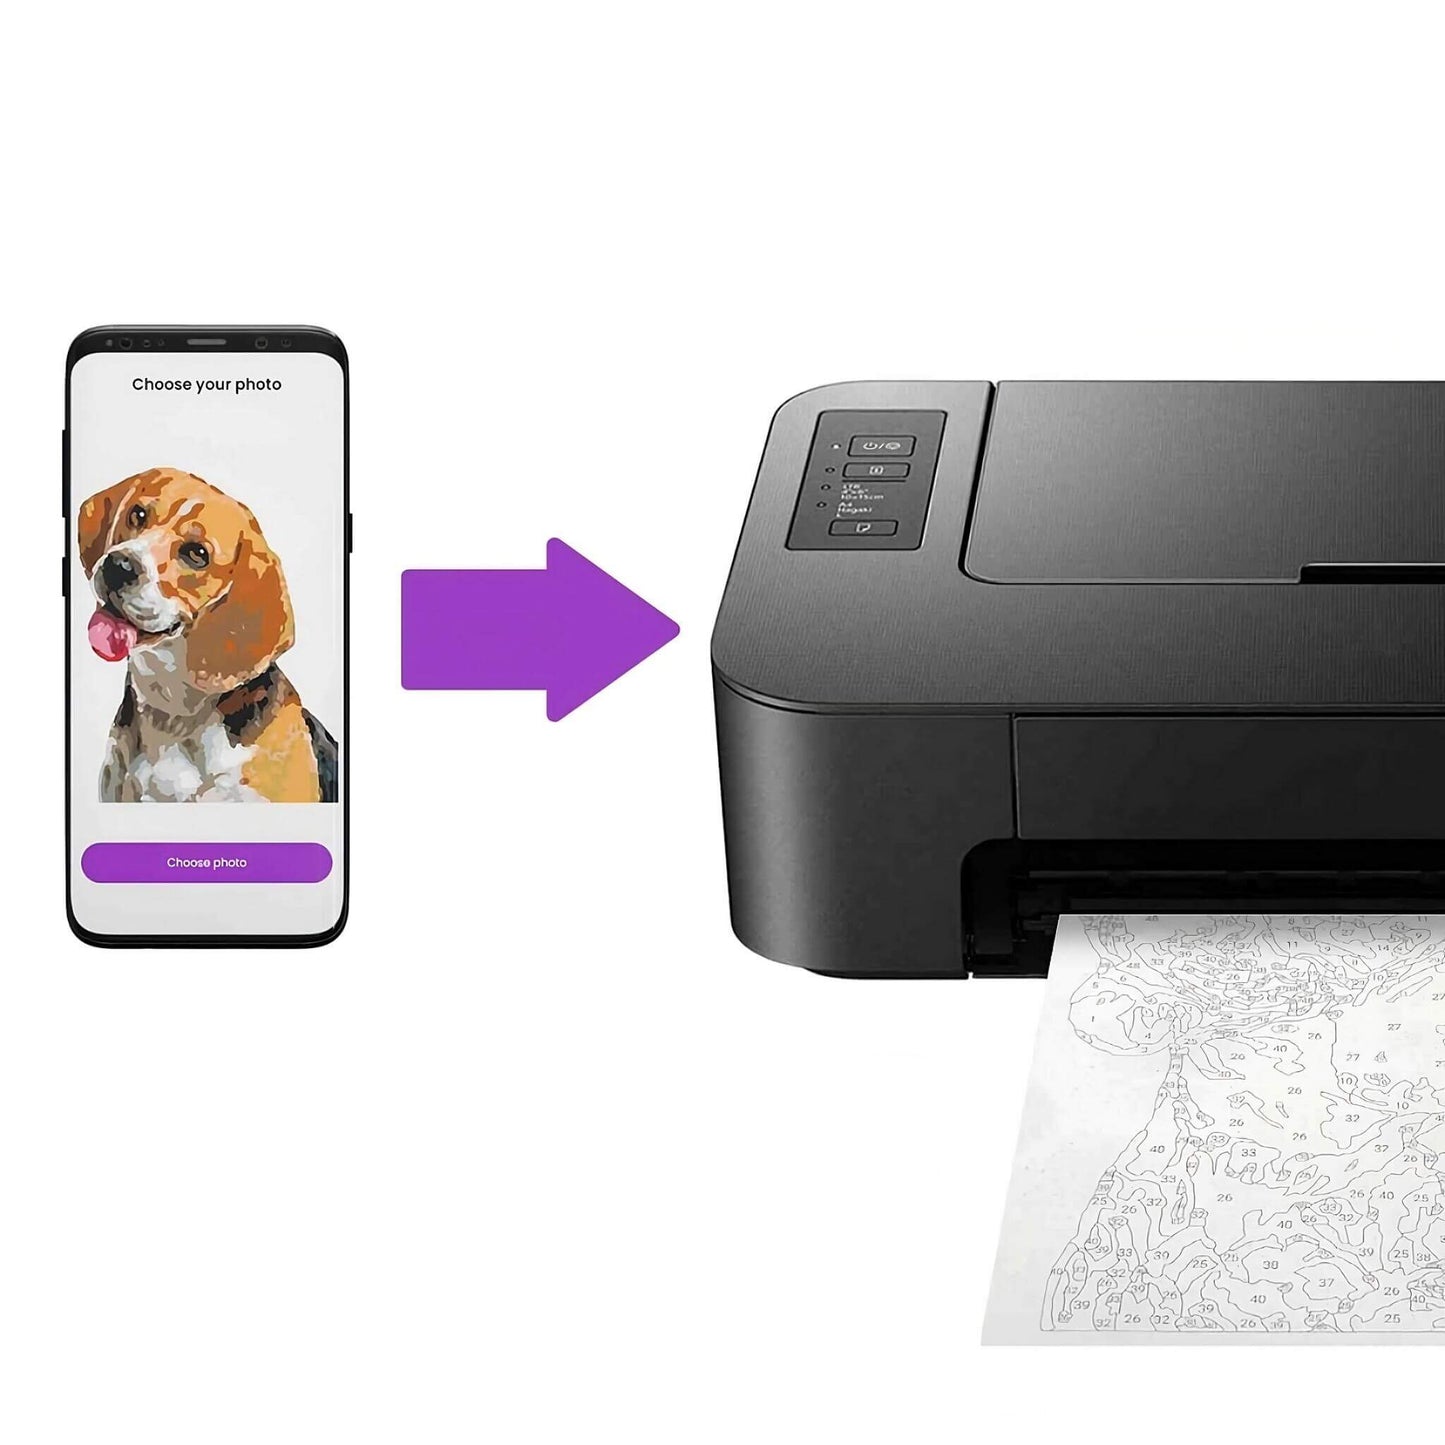 A smartphone displaying a custom paint by number preview of a dog with a 'Choose photo' button, pointing with a purple arrow towards a printer which is printing out a custom paint by number design of the dog.